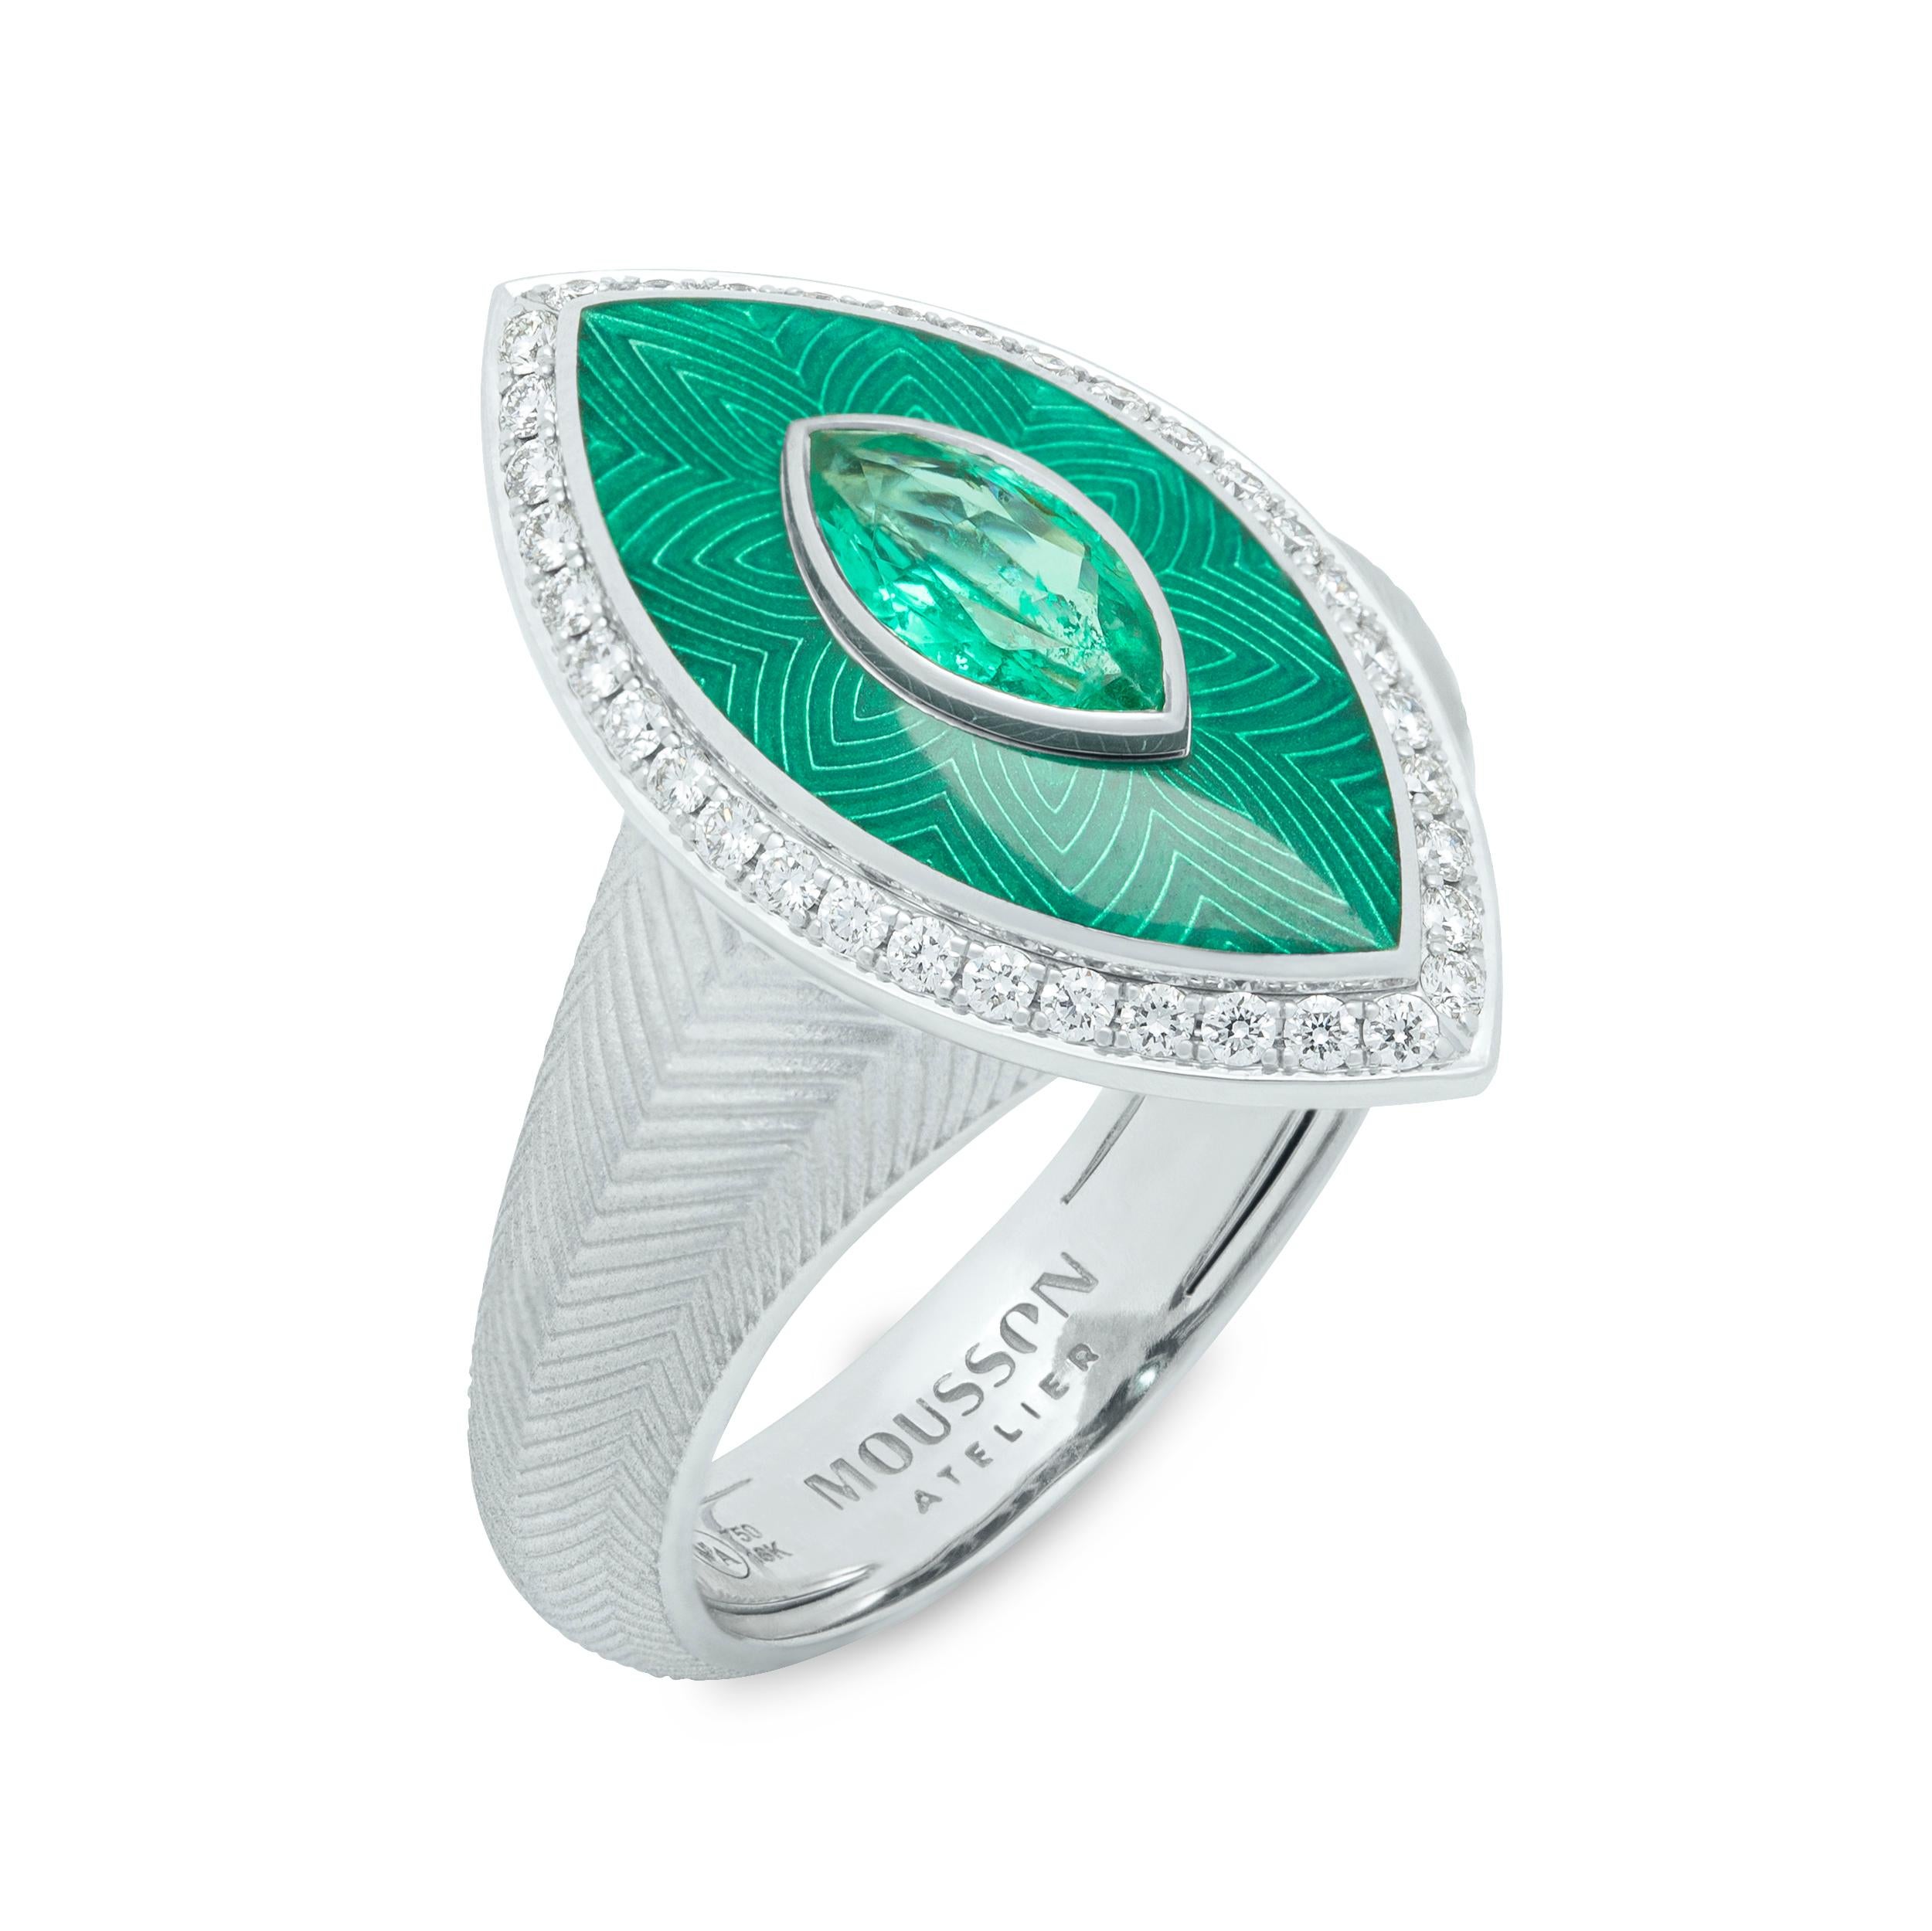 Emerald Diamonds 18 Karat White Gold Tweed Marquise Ring
What we presented to you is the Ring from our famous Tweed collection. But it was made in an unusual form of a marquise. Incredibly beautiful green shades of central stone Emerald weighing